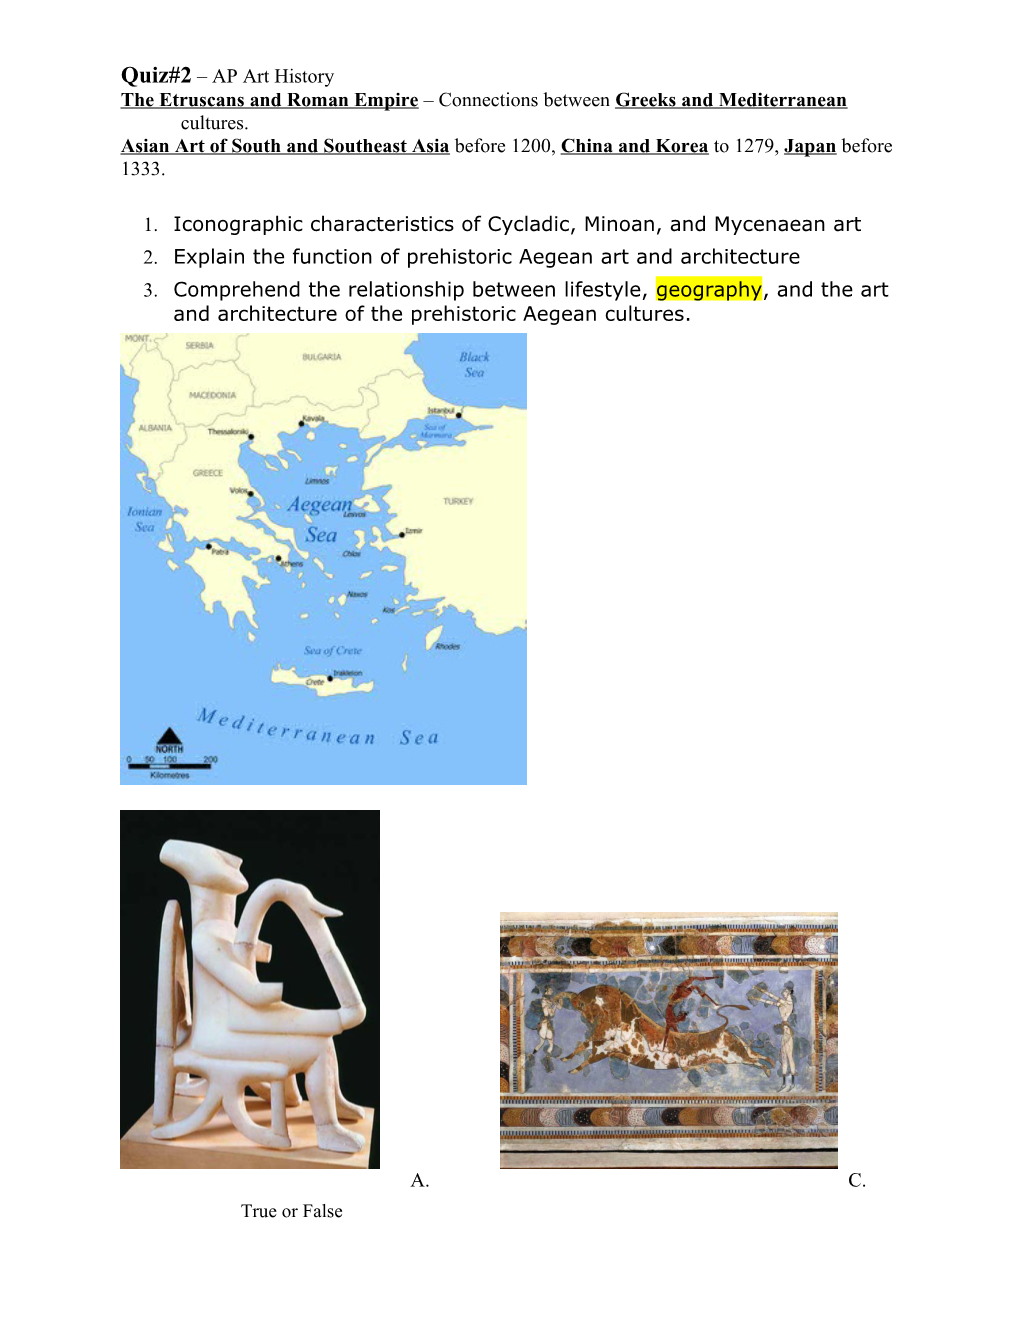 The Etruscans and Roman Empire Connections Between Greeks and Mediterranean Cultures